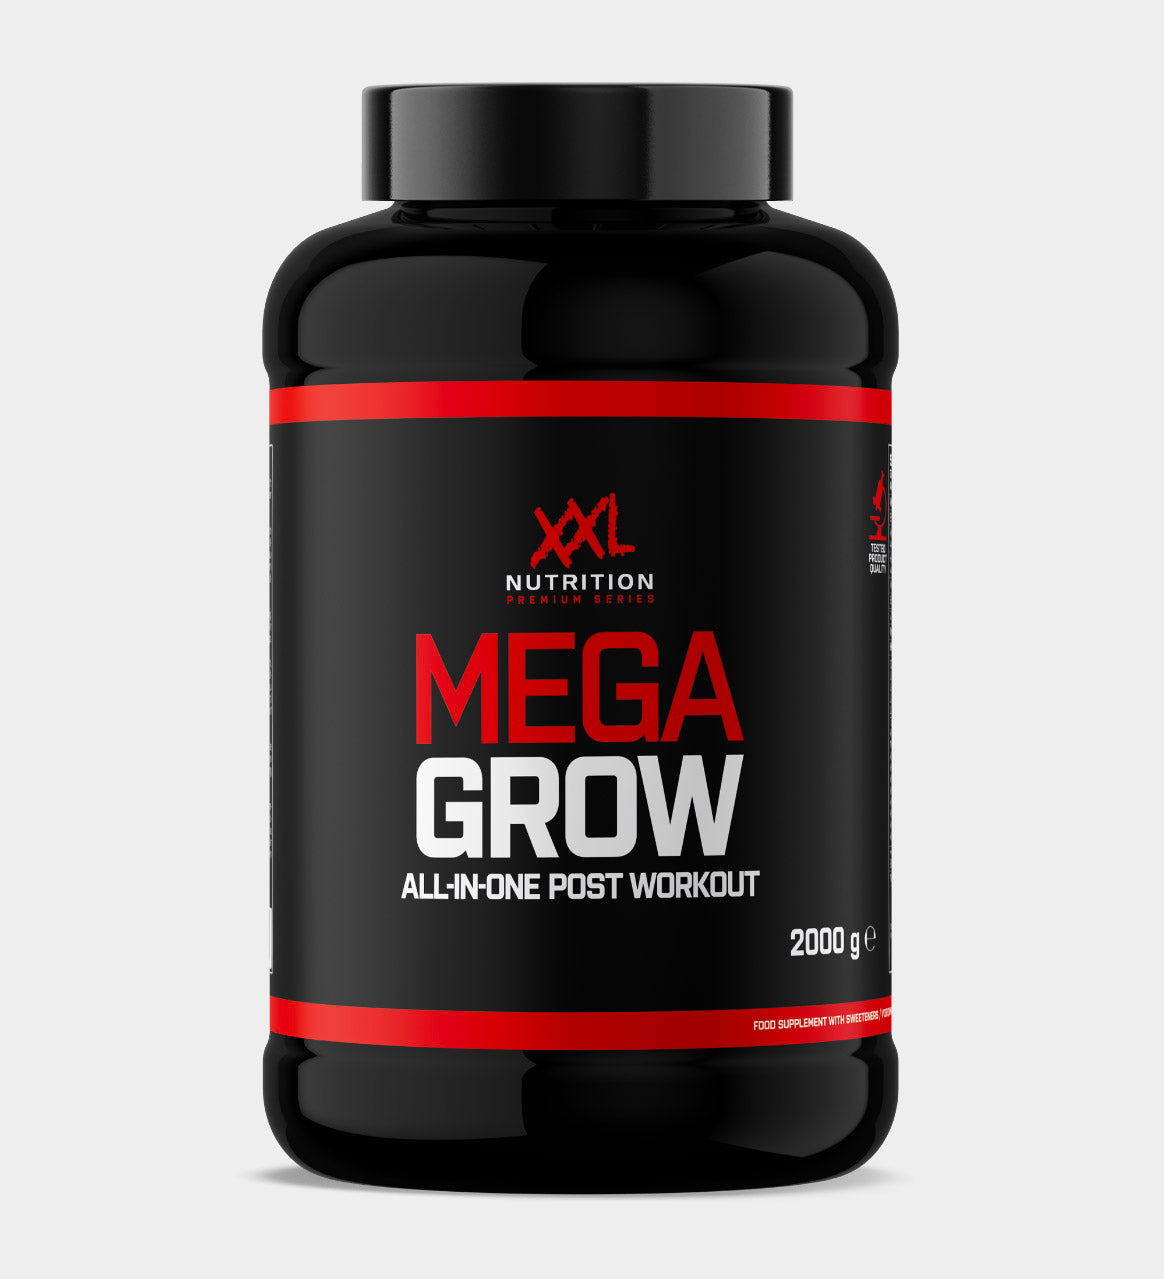 XXL Nutrition - Mega Grow Post Workout - Booster Fight Store